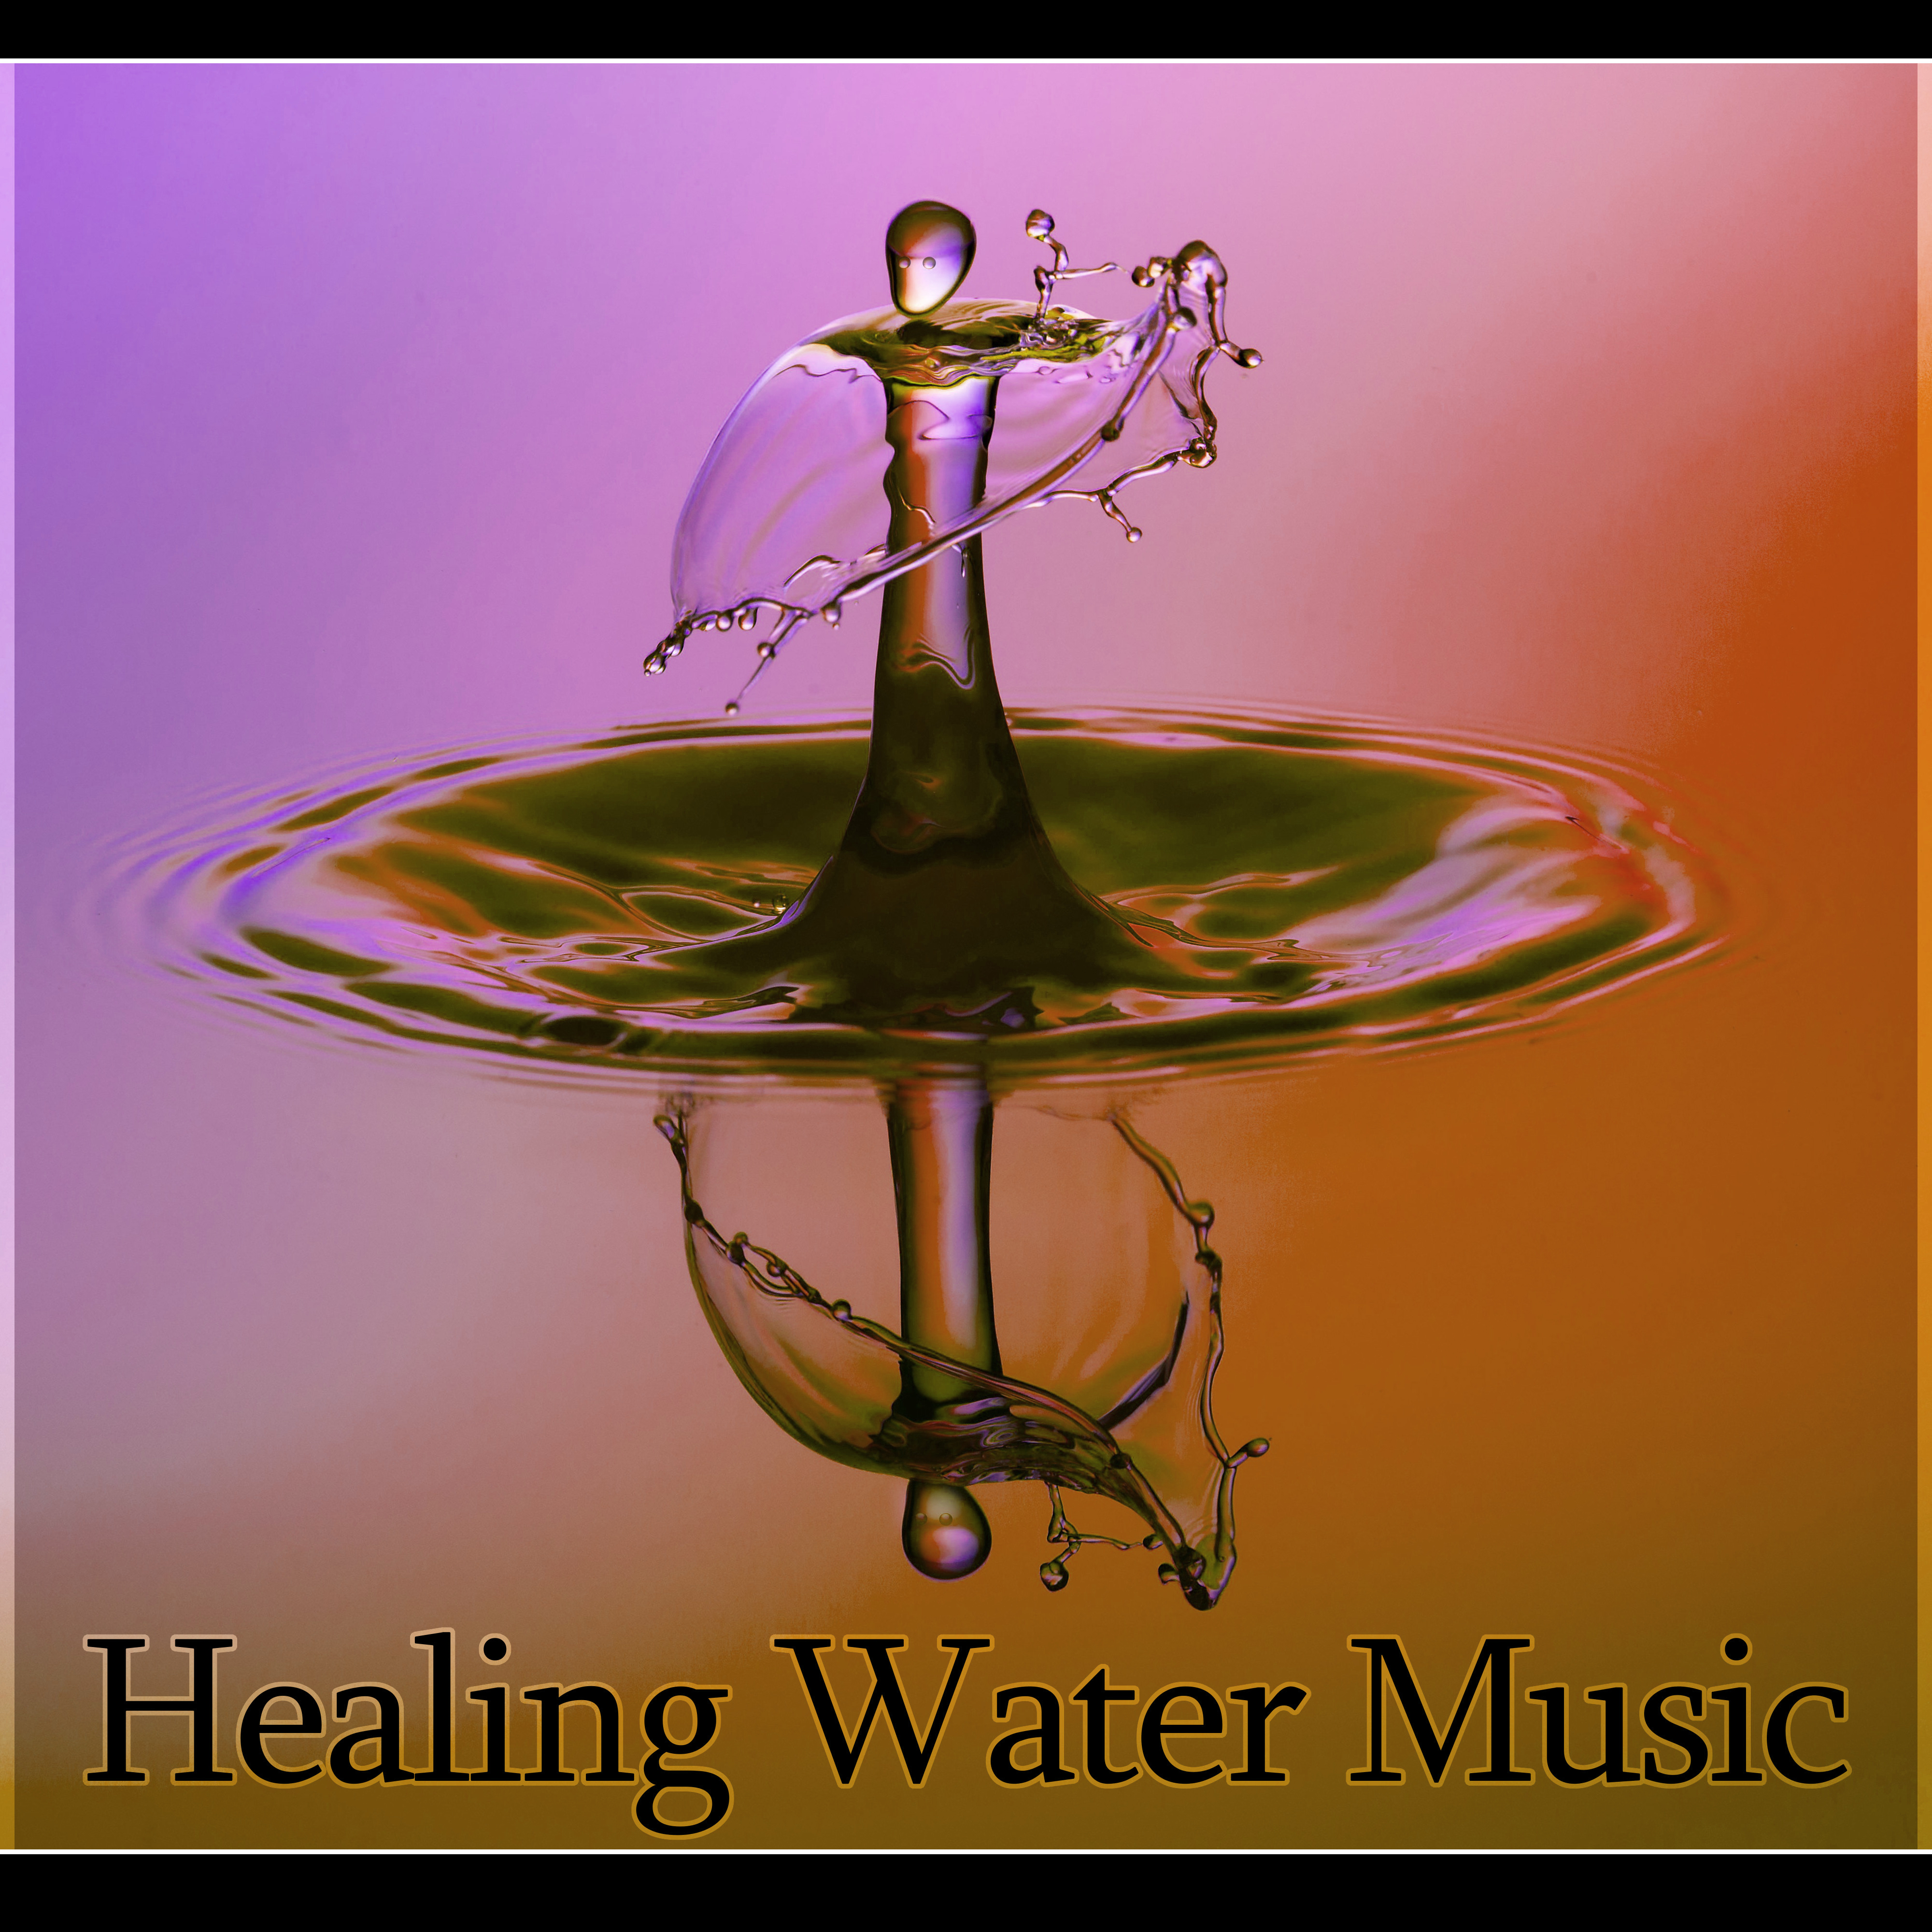 Healing Water Music - Sounds of Spring Rain, Peaceful Relaxing Nature Sounds of Water, Good for Sleep, Massage, Tai Chi, Meditation, Serenity Music to Relief Stress, Music for Babies